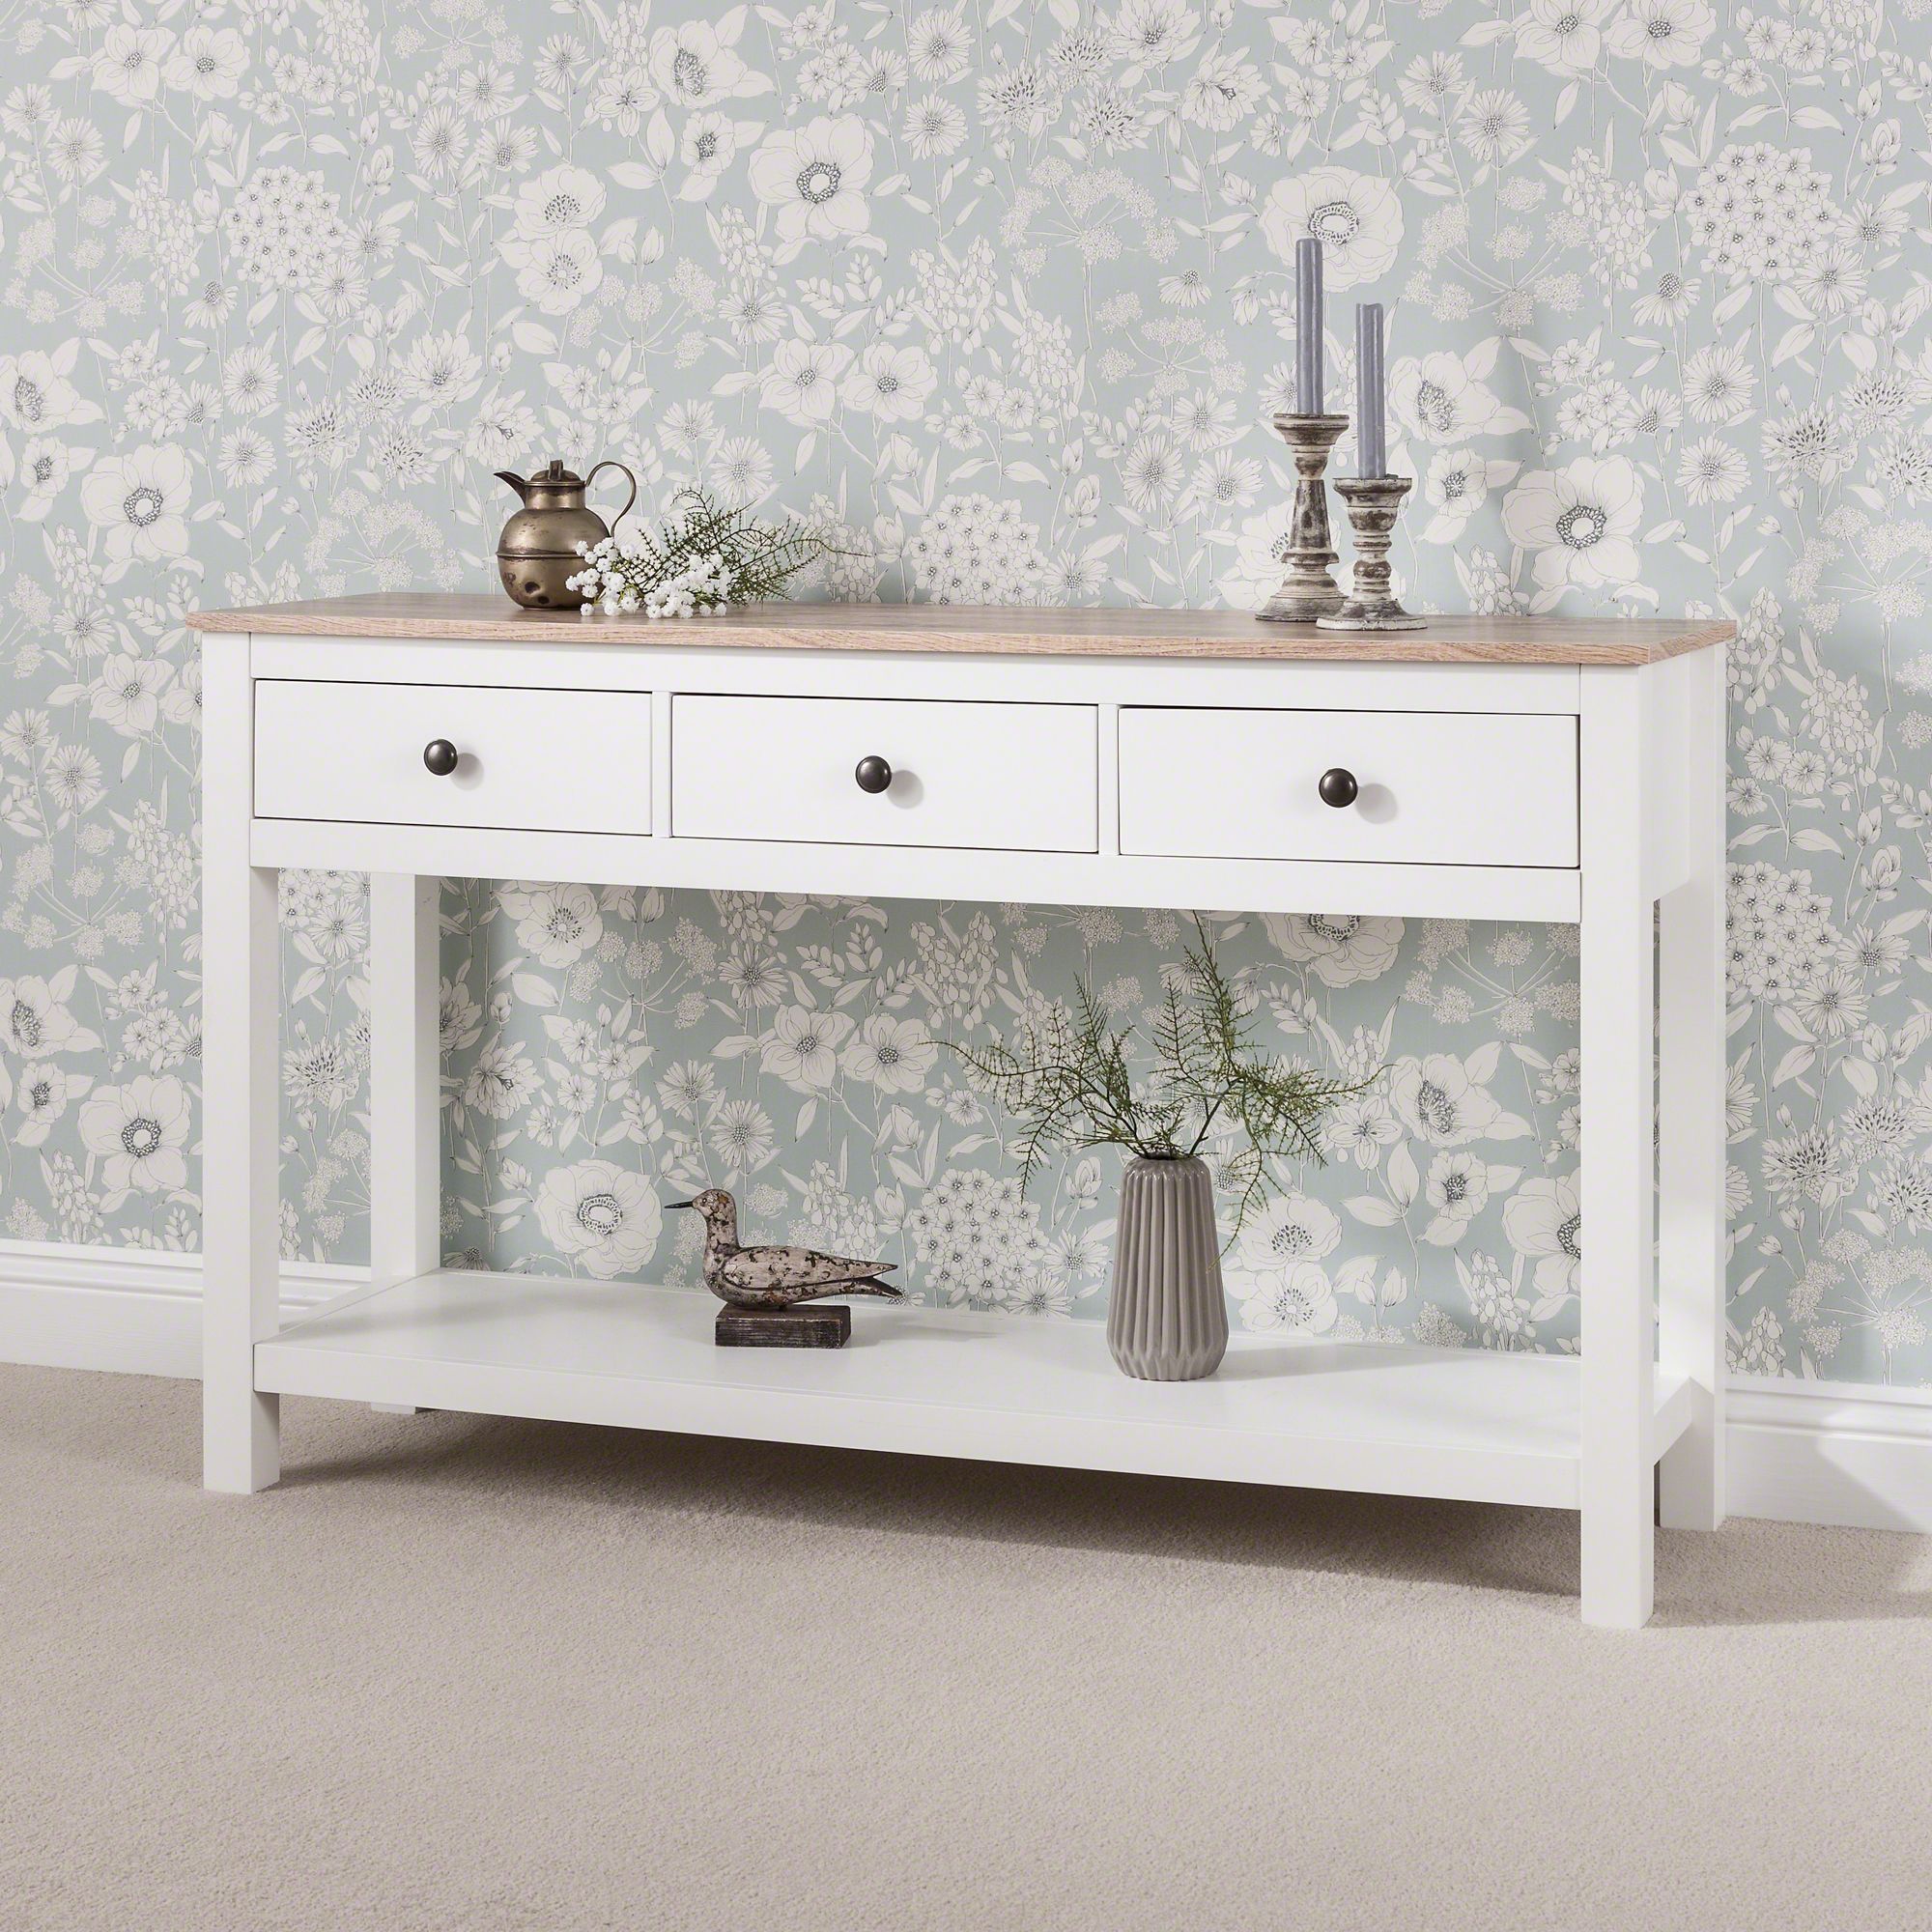 Laura James White Console Table With 2 & 3 Drawers And Shelf | Ebay Inside Marble And White Console Tables (View 20 of 20)